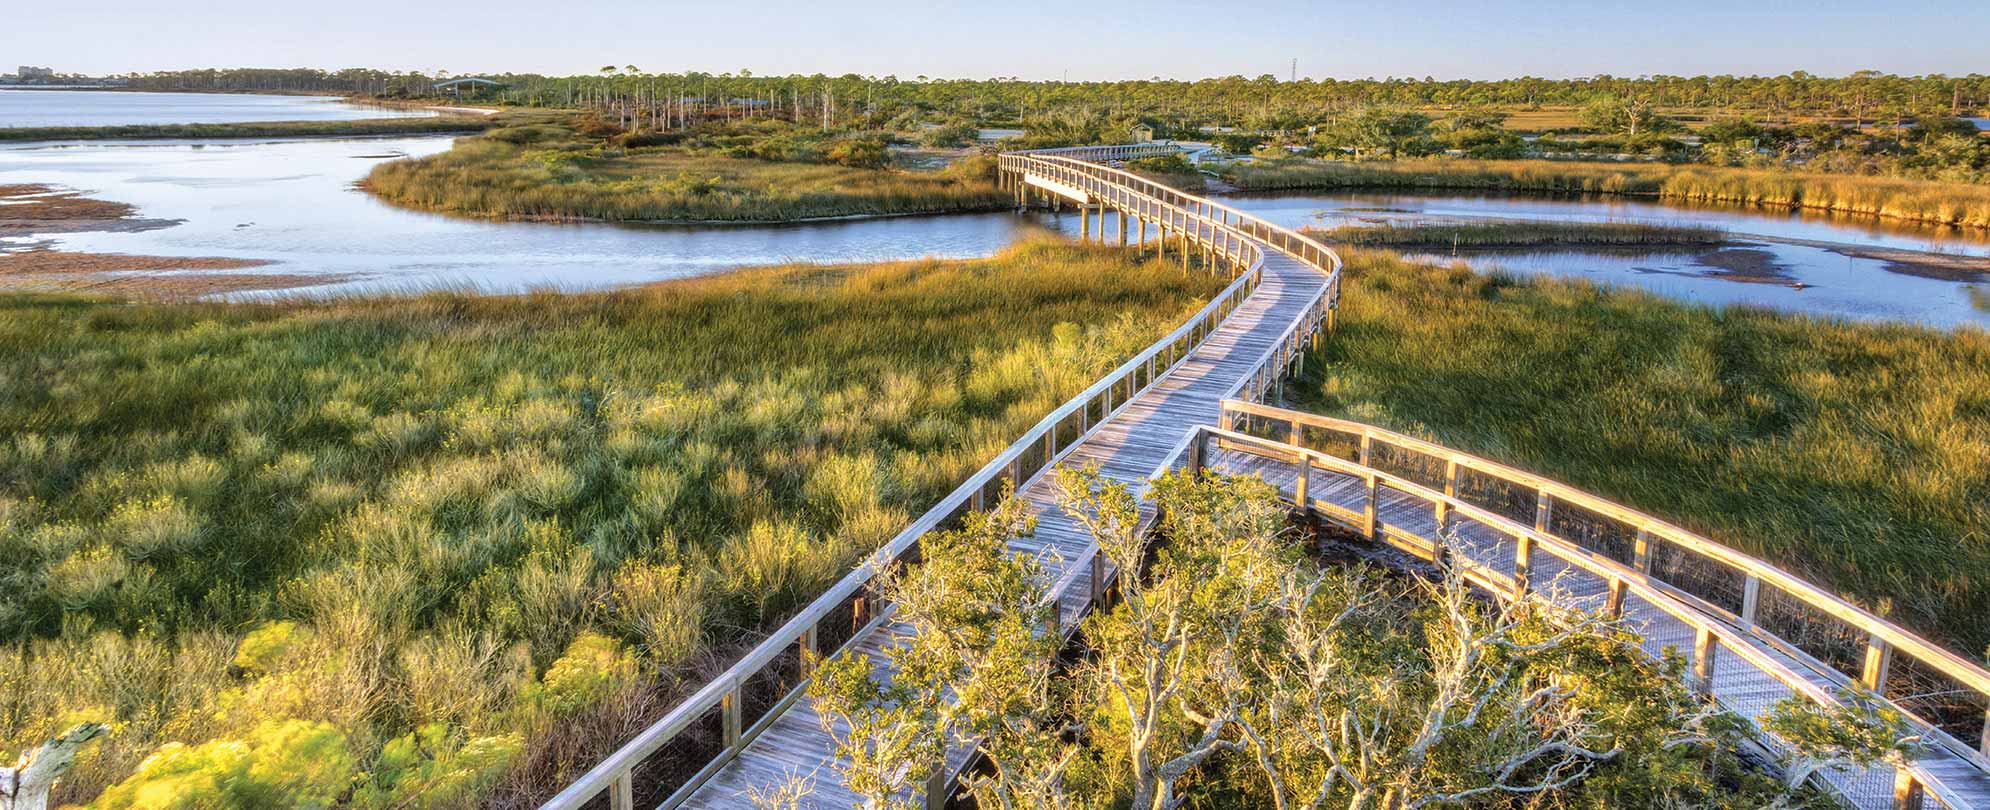 A nature boardwalk stretches over the wetlands on a national park vacation